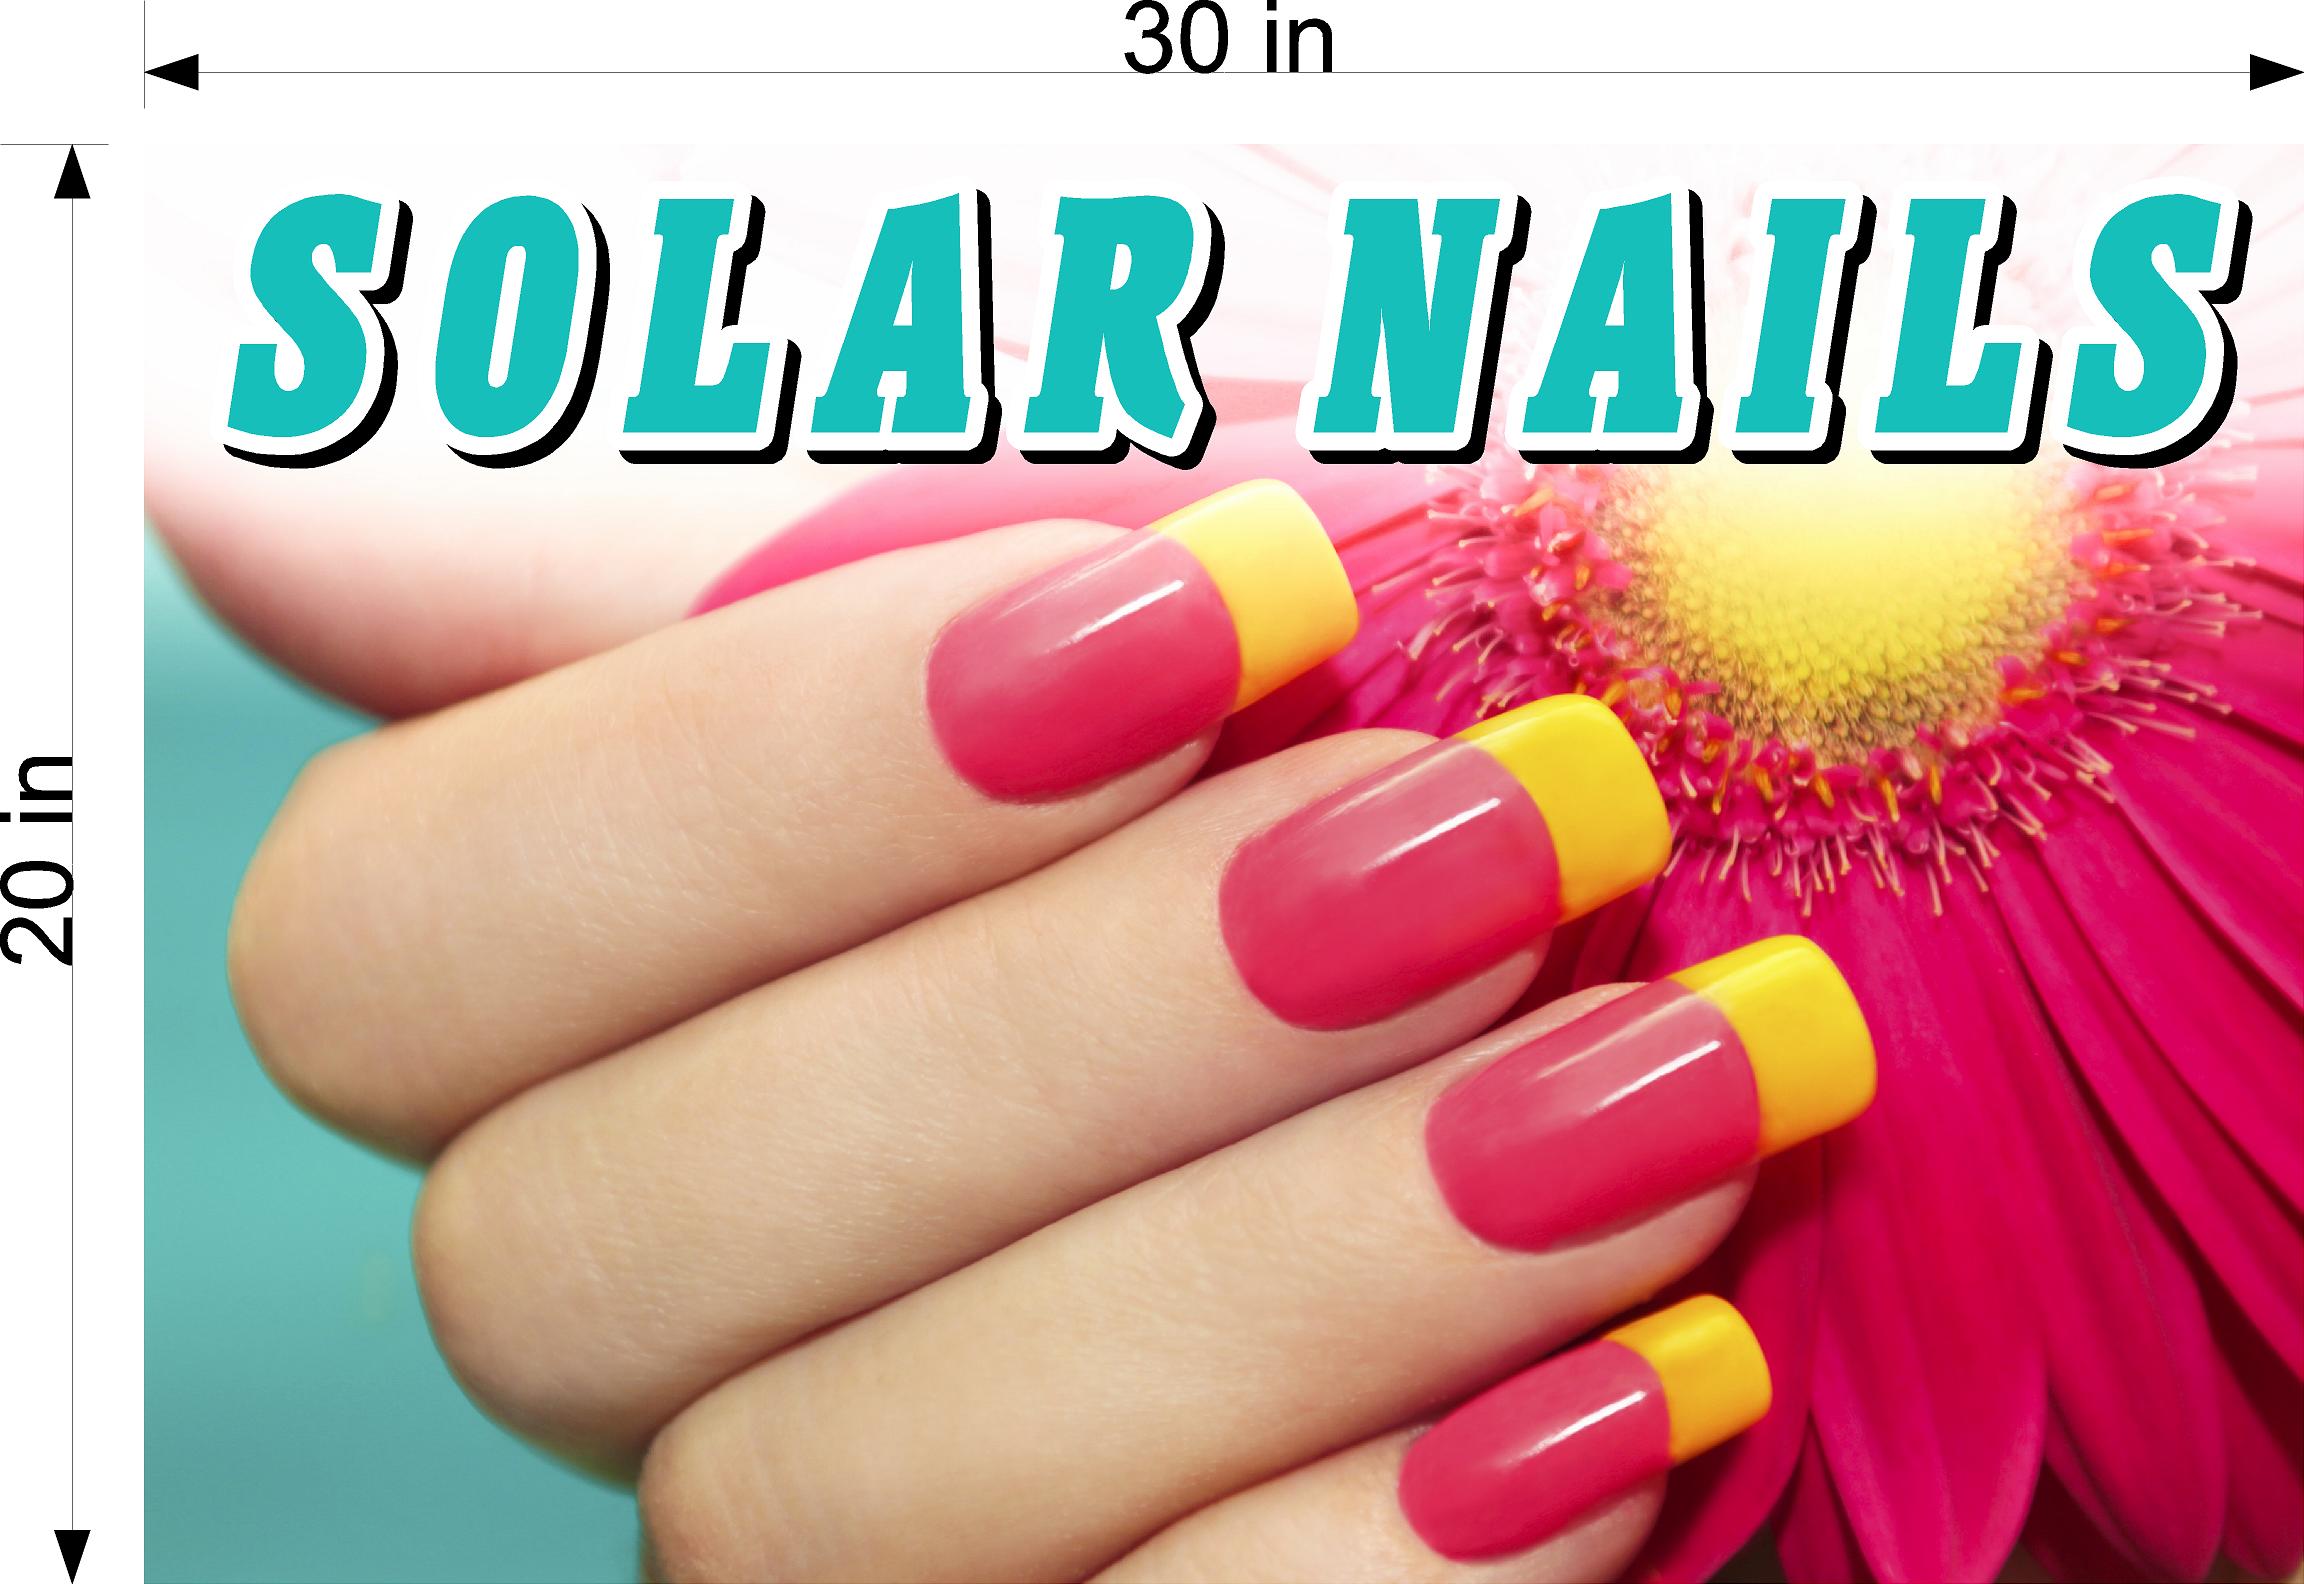 Solar 08 Wallpaper Fabric Poster Decal with Adhesive Backing Wall Sticker Decor Nail Salon Sign Horizontal